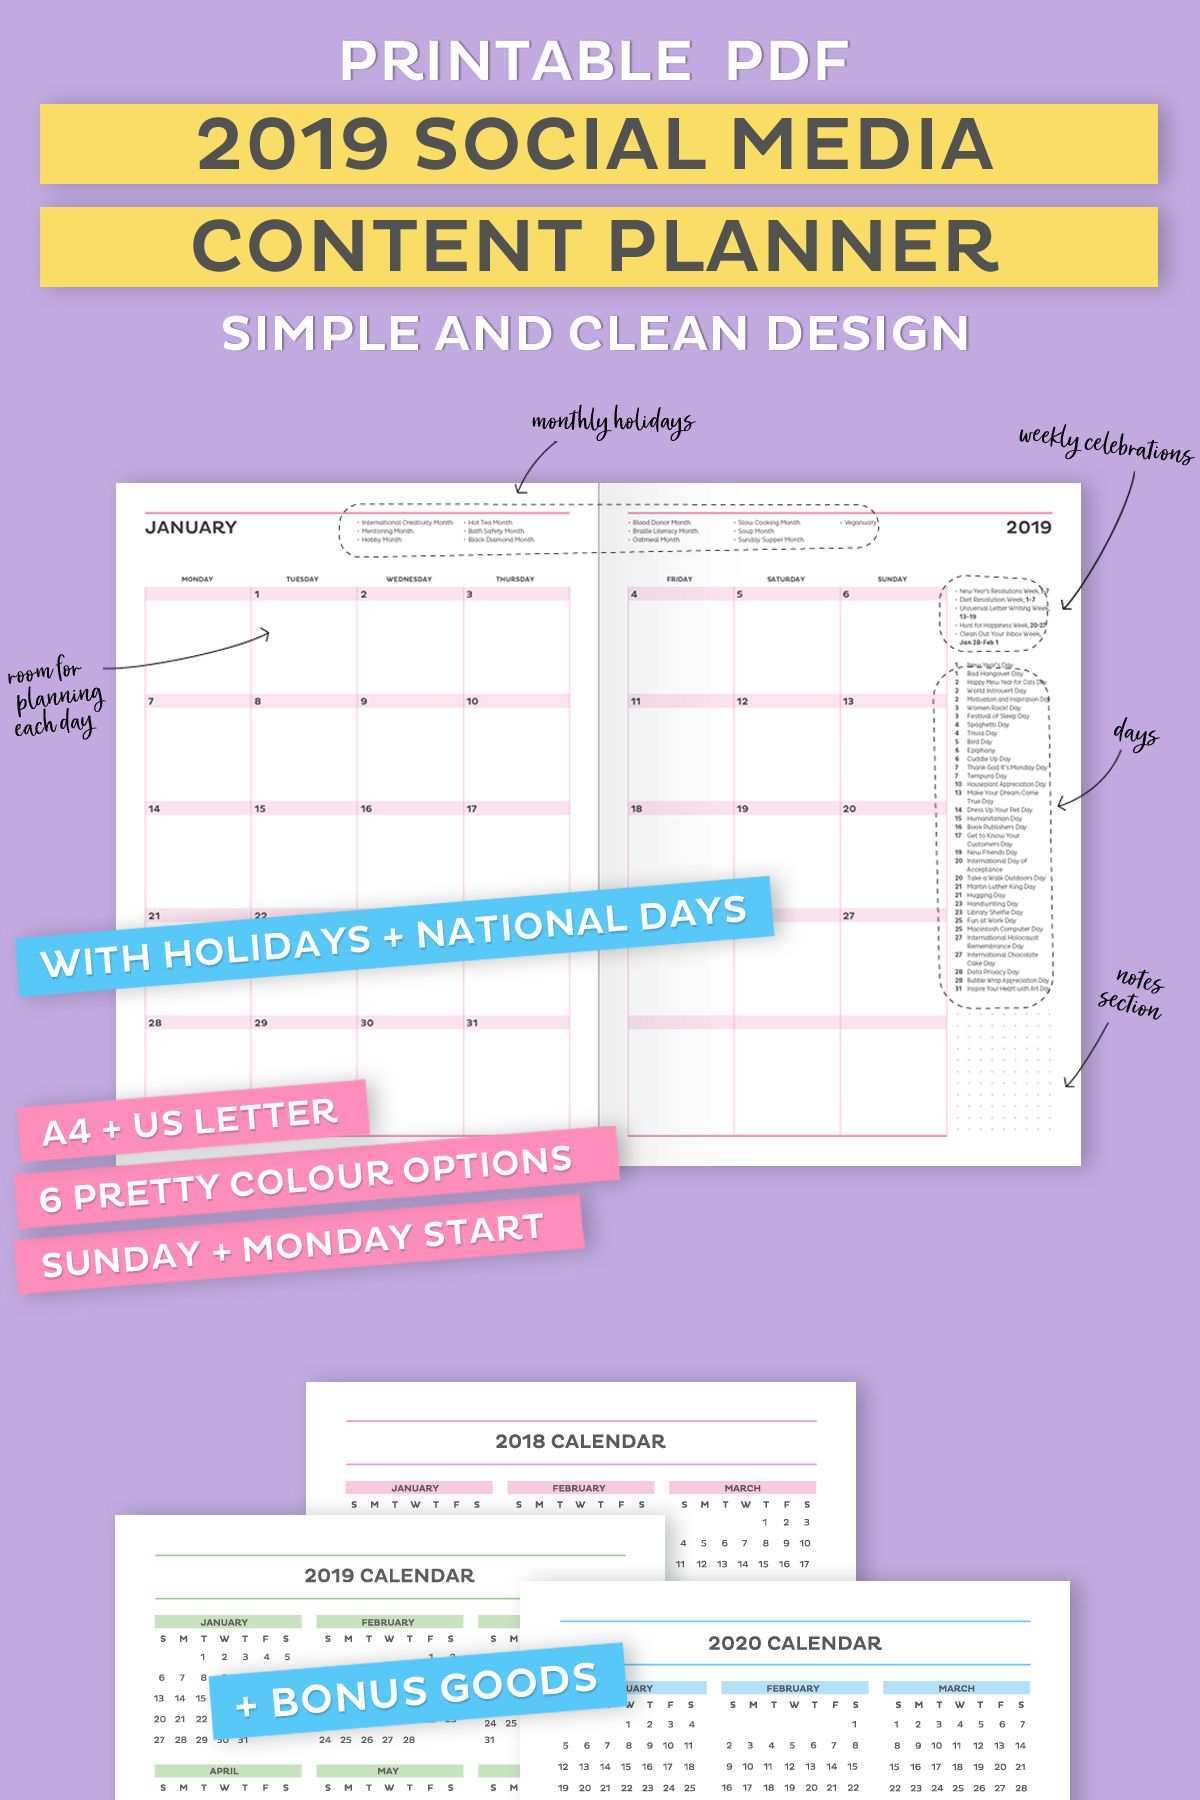 2019 Social Media Planner With Holidays And National Days For Small Creative Business Social Media Content Planner Social Media Planner Content Planner